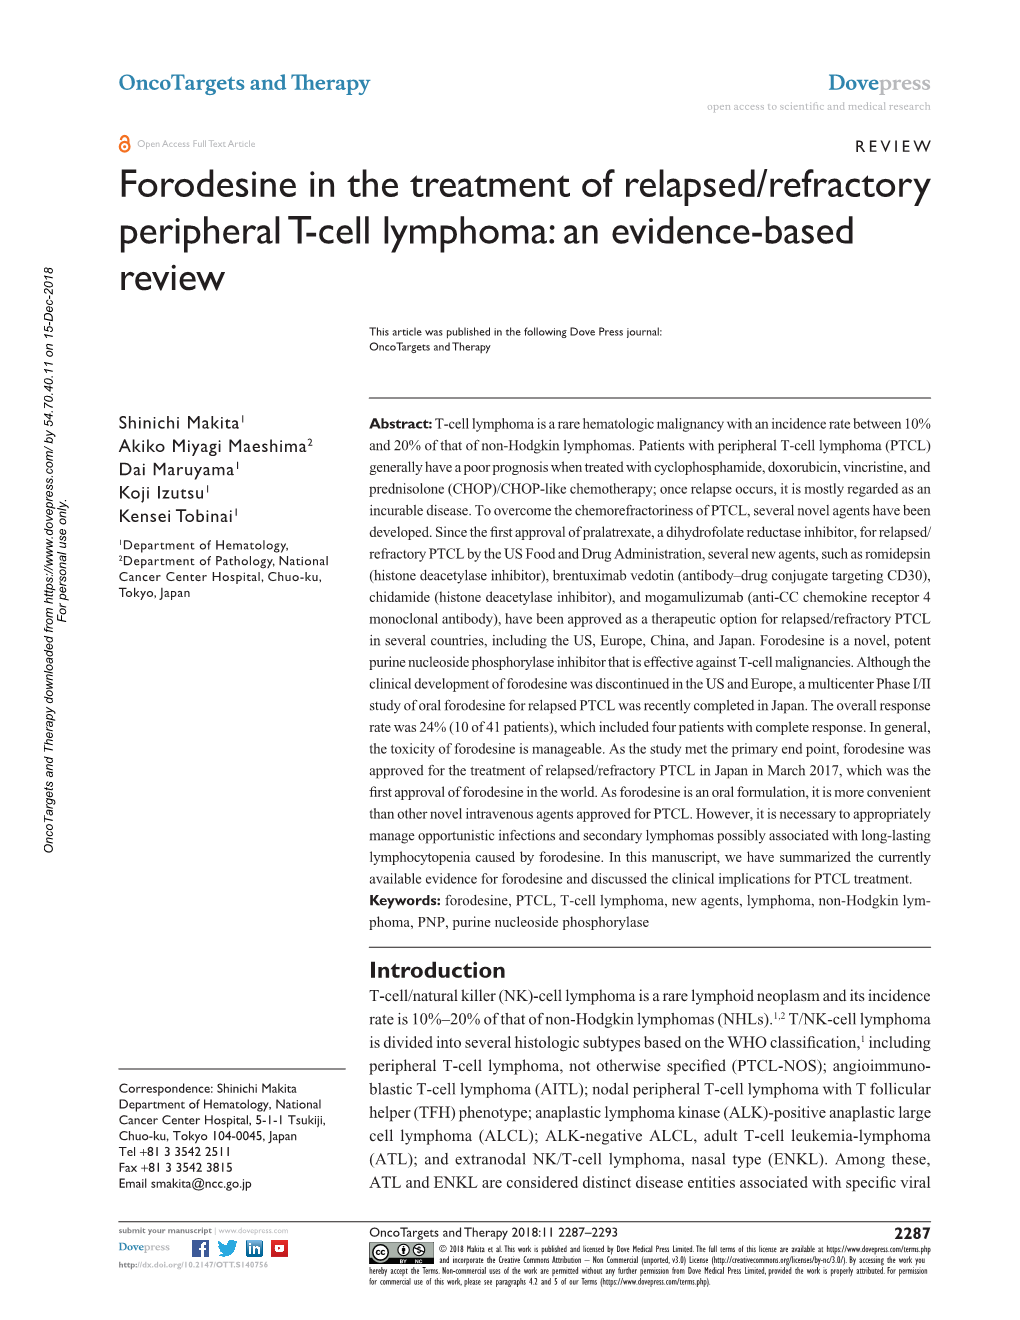 Forodesine in the Treatment of Relapsed/Refractory Peripheral T-Cell Lymphoma: an Evidence-Based Review